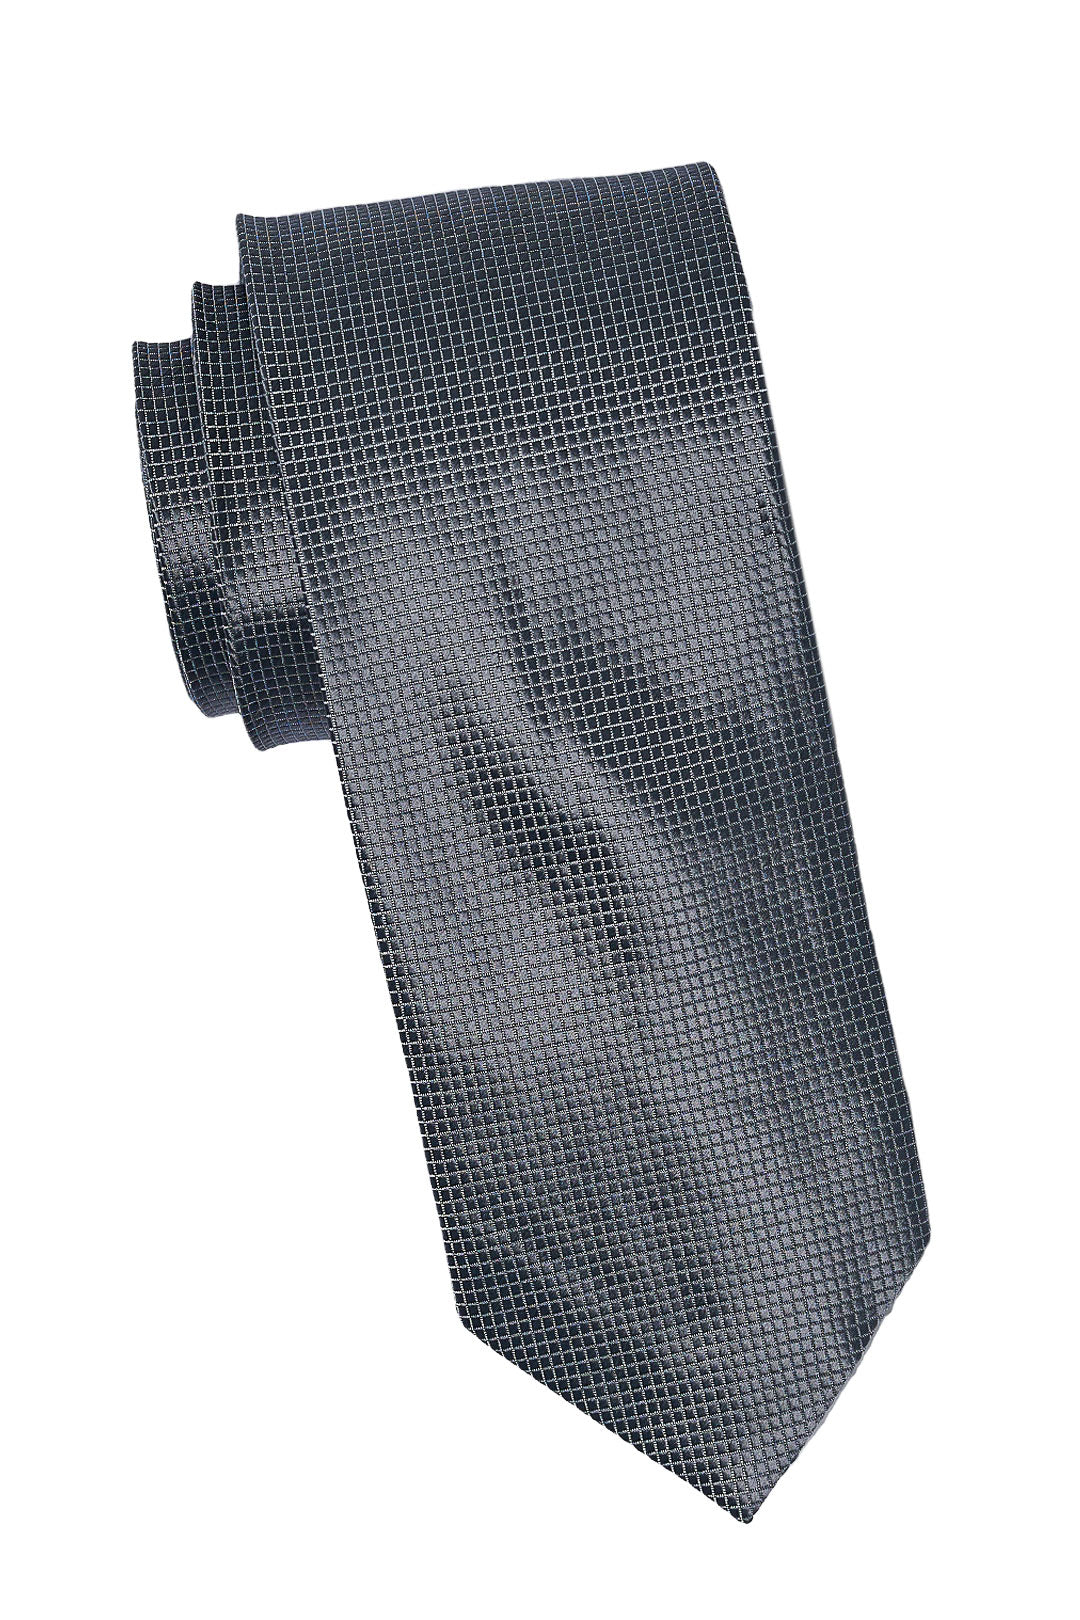 Gray Patterned Tie